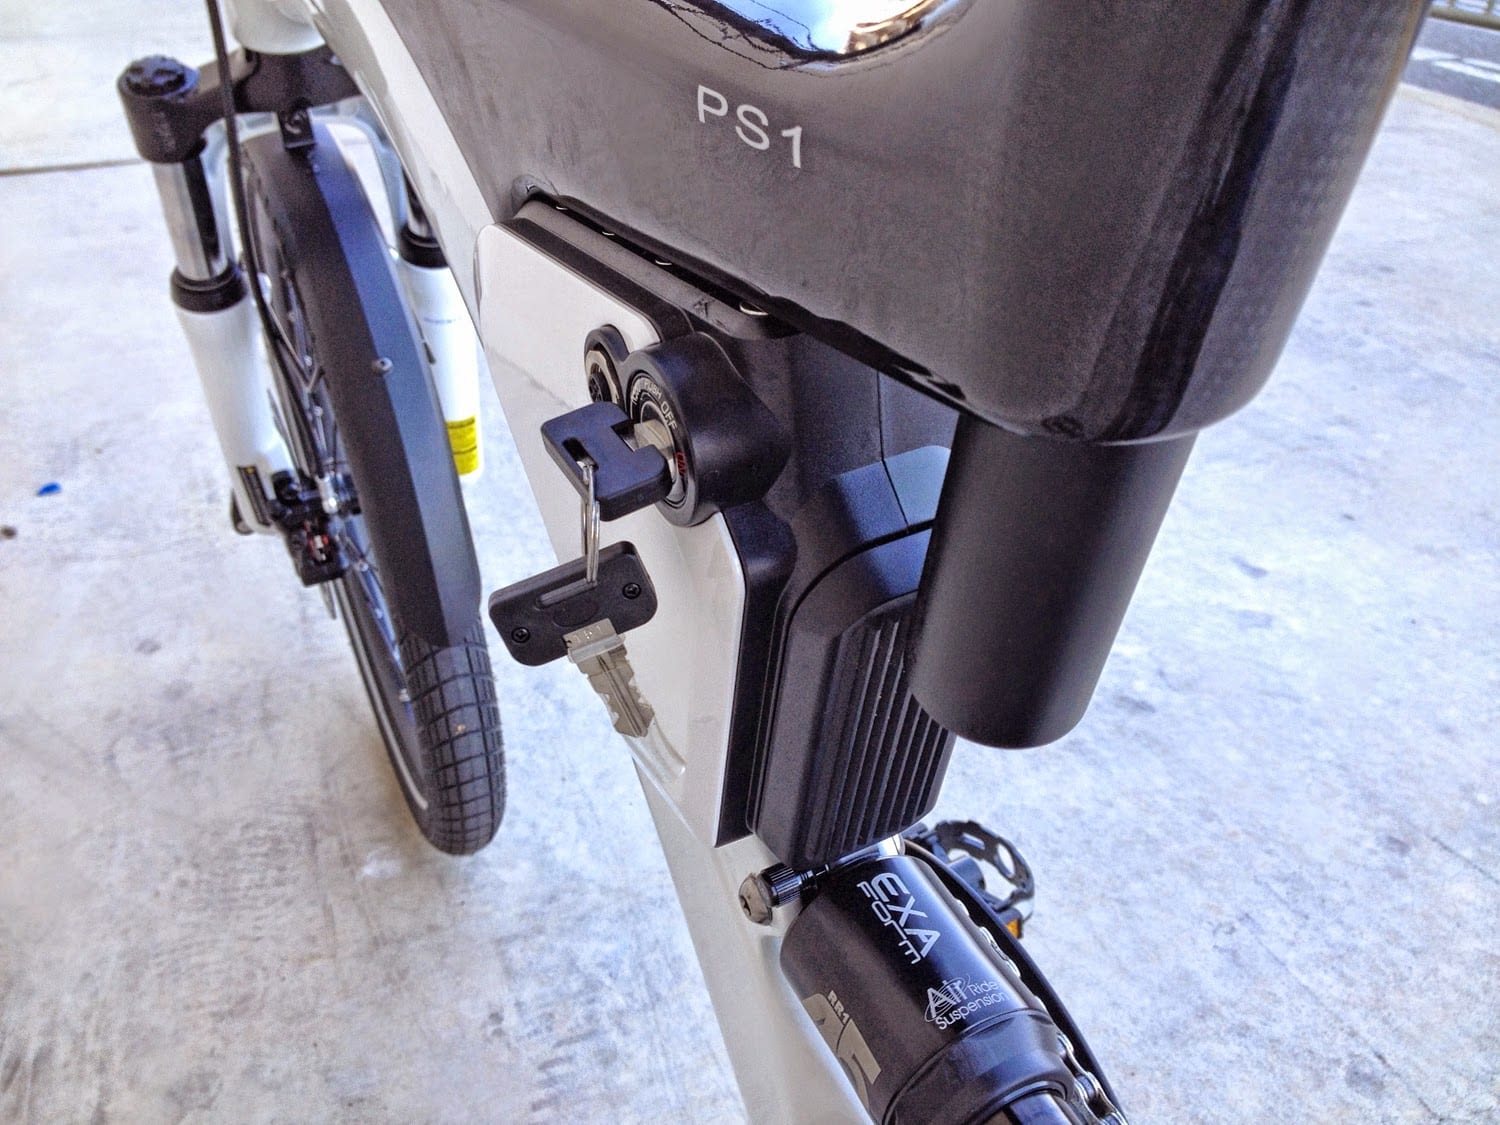 BESV Panther PS1 Review | ElectricBikeReview.com